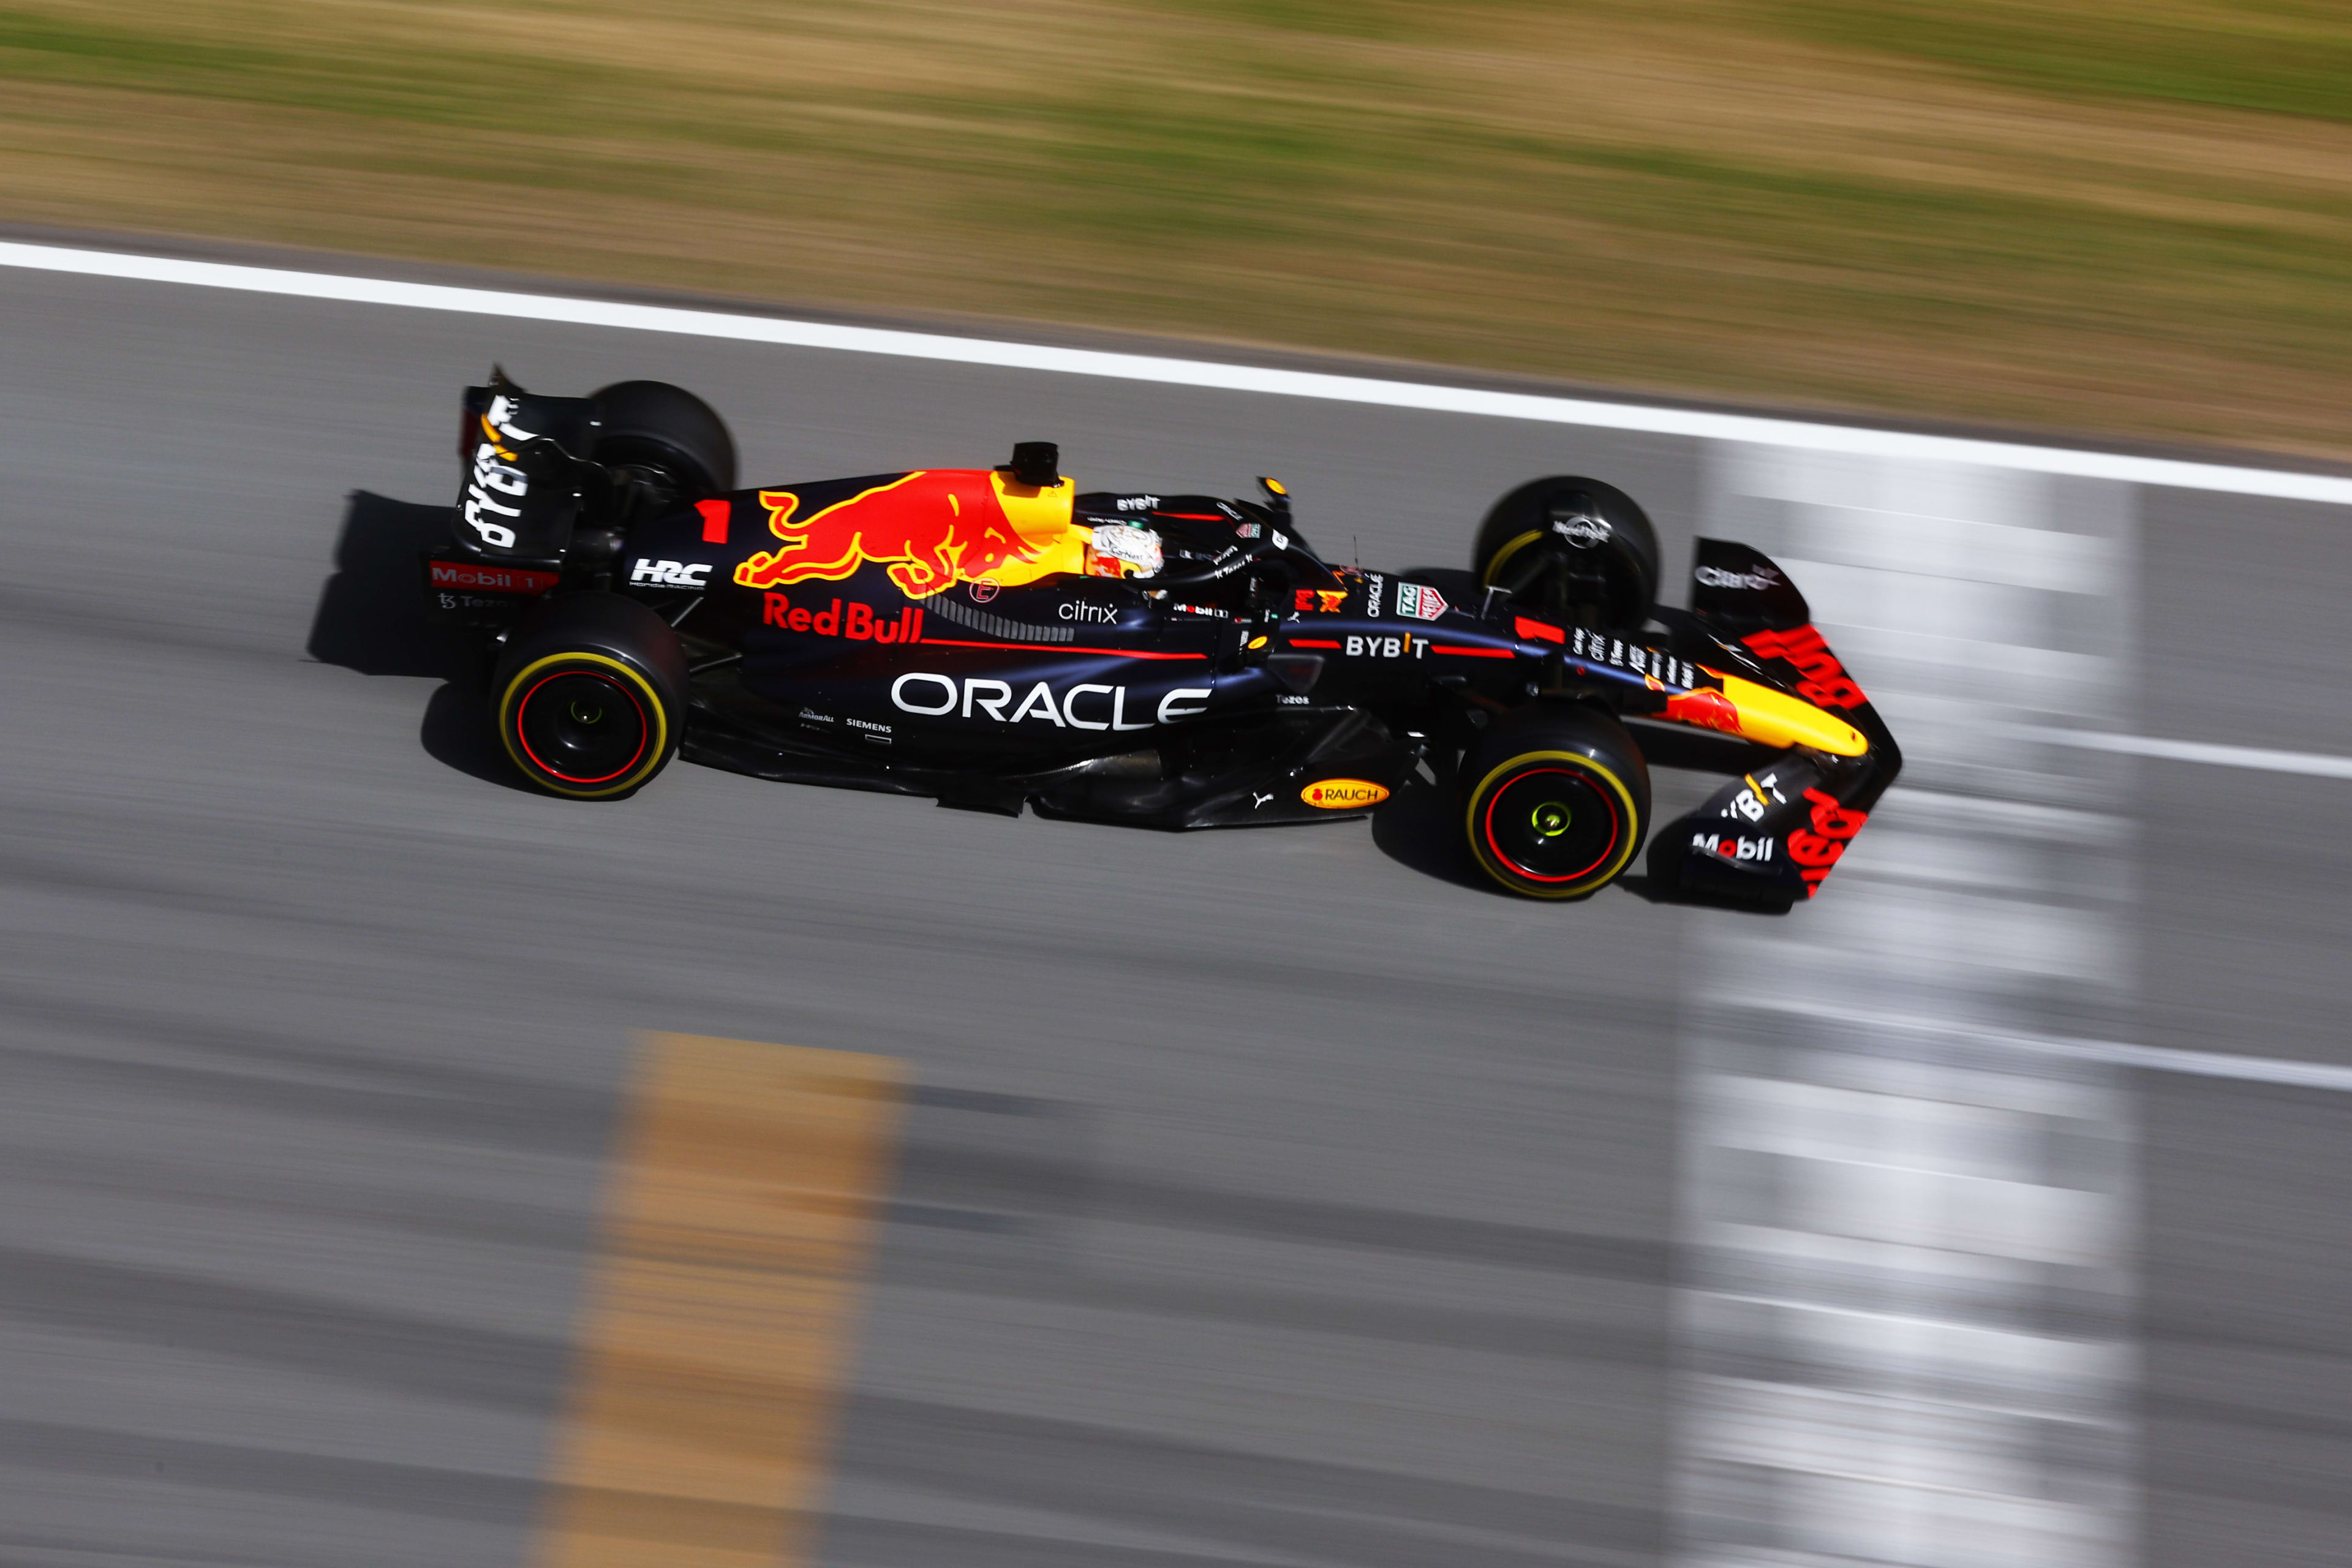 Verstappen leads Red Bull 1-2 after Leclerc retires from rollercoaster Spanish Grand Prix - Formula 1